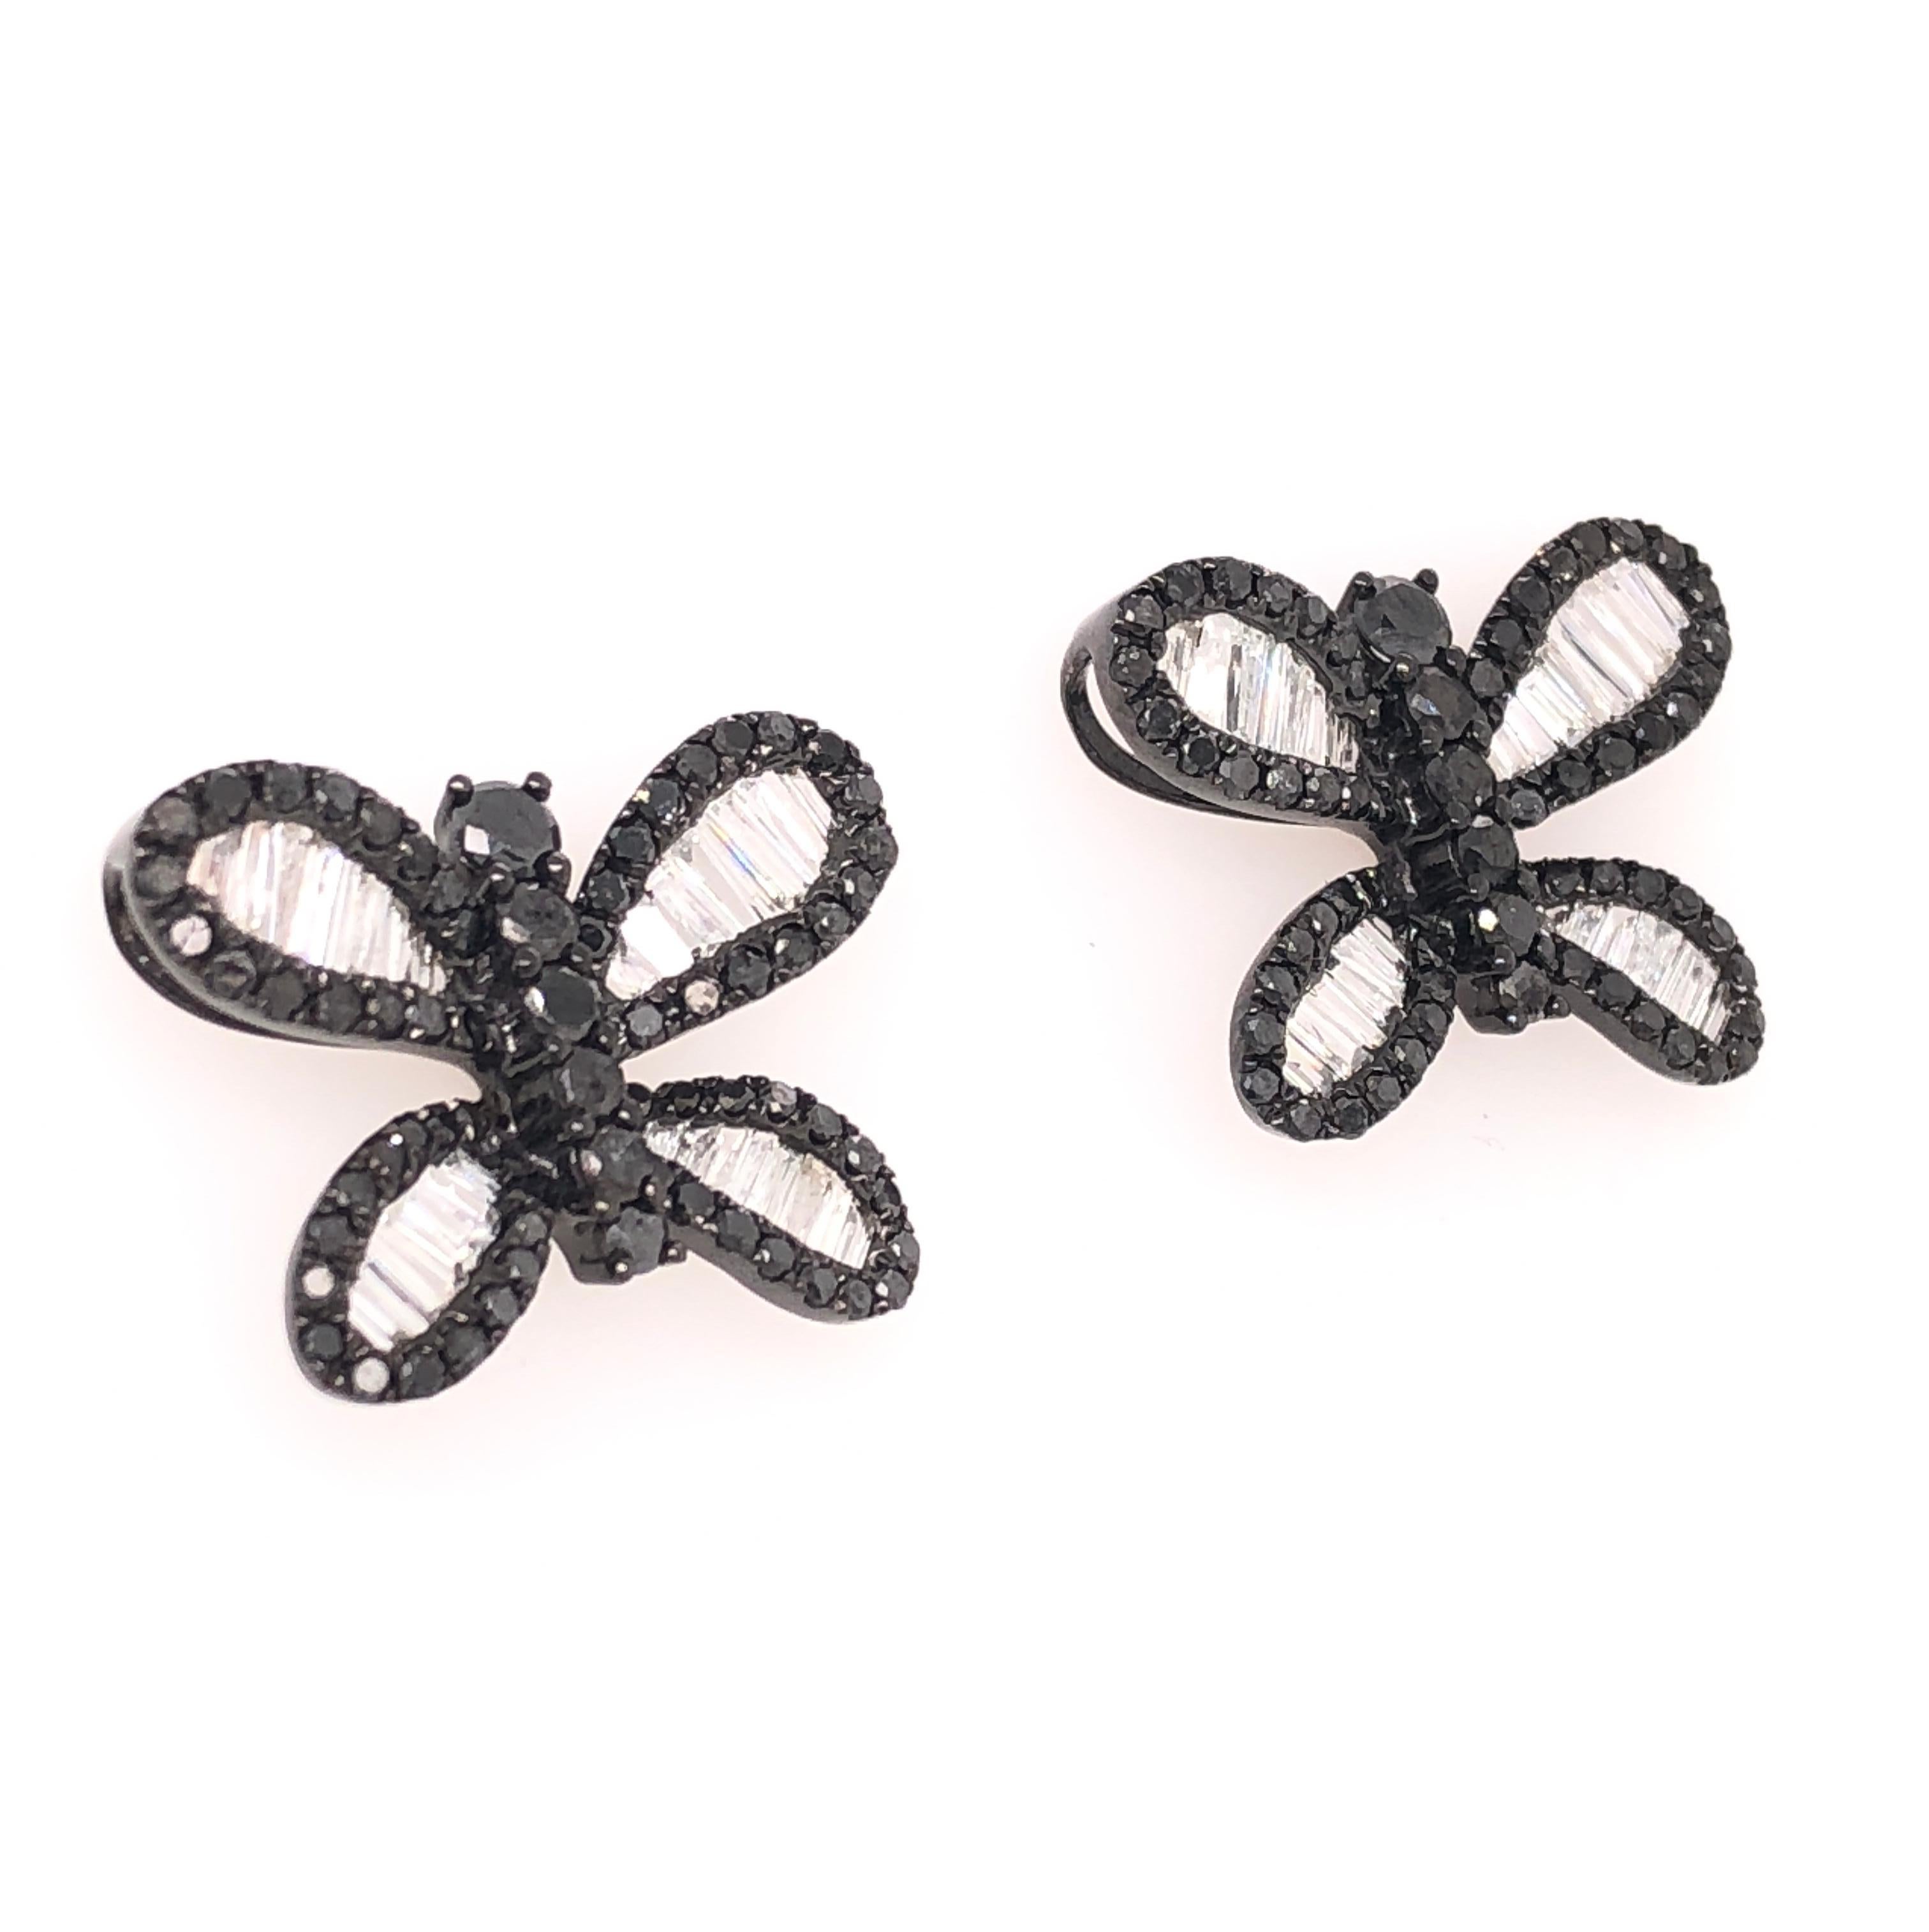 Organic Forms Collection 

Butterfly shaped black and white Diamond studs set in 18K black rhodium gold. 

Black Diamond: 1.22ct total weight.
Diamonds: 0.70ct total weight.
All diamonds are G-H/SI stones.
Width of butterfly -  is approximately